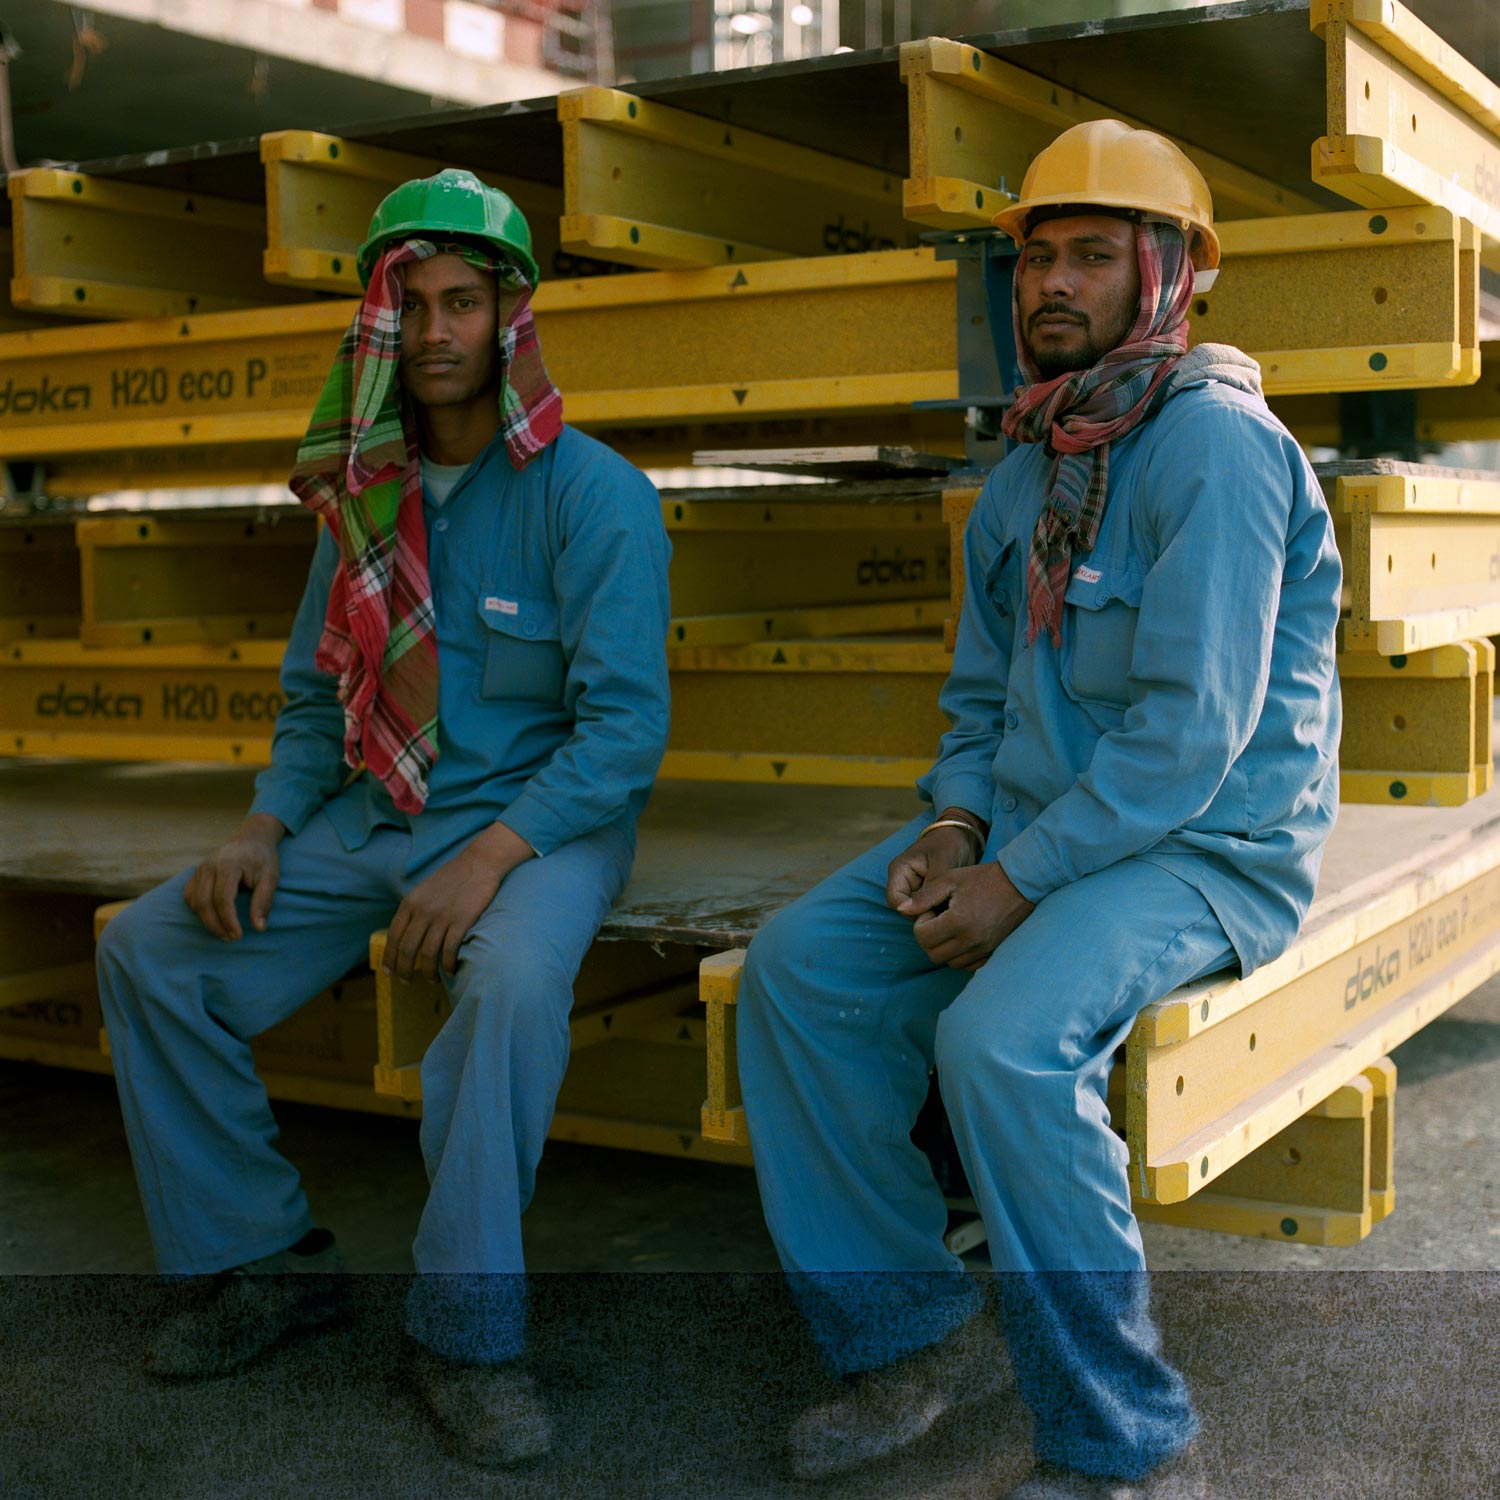 Two construction workers taking a break on a construction site in Dubai. analogue photography.